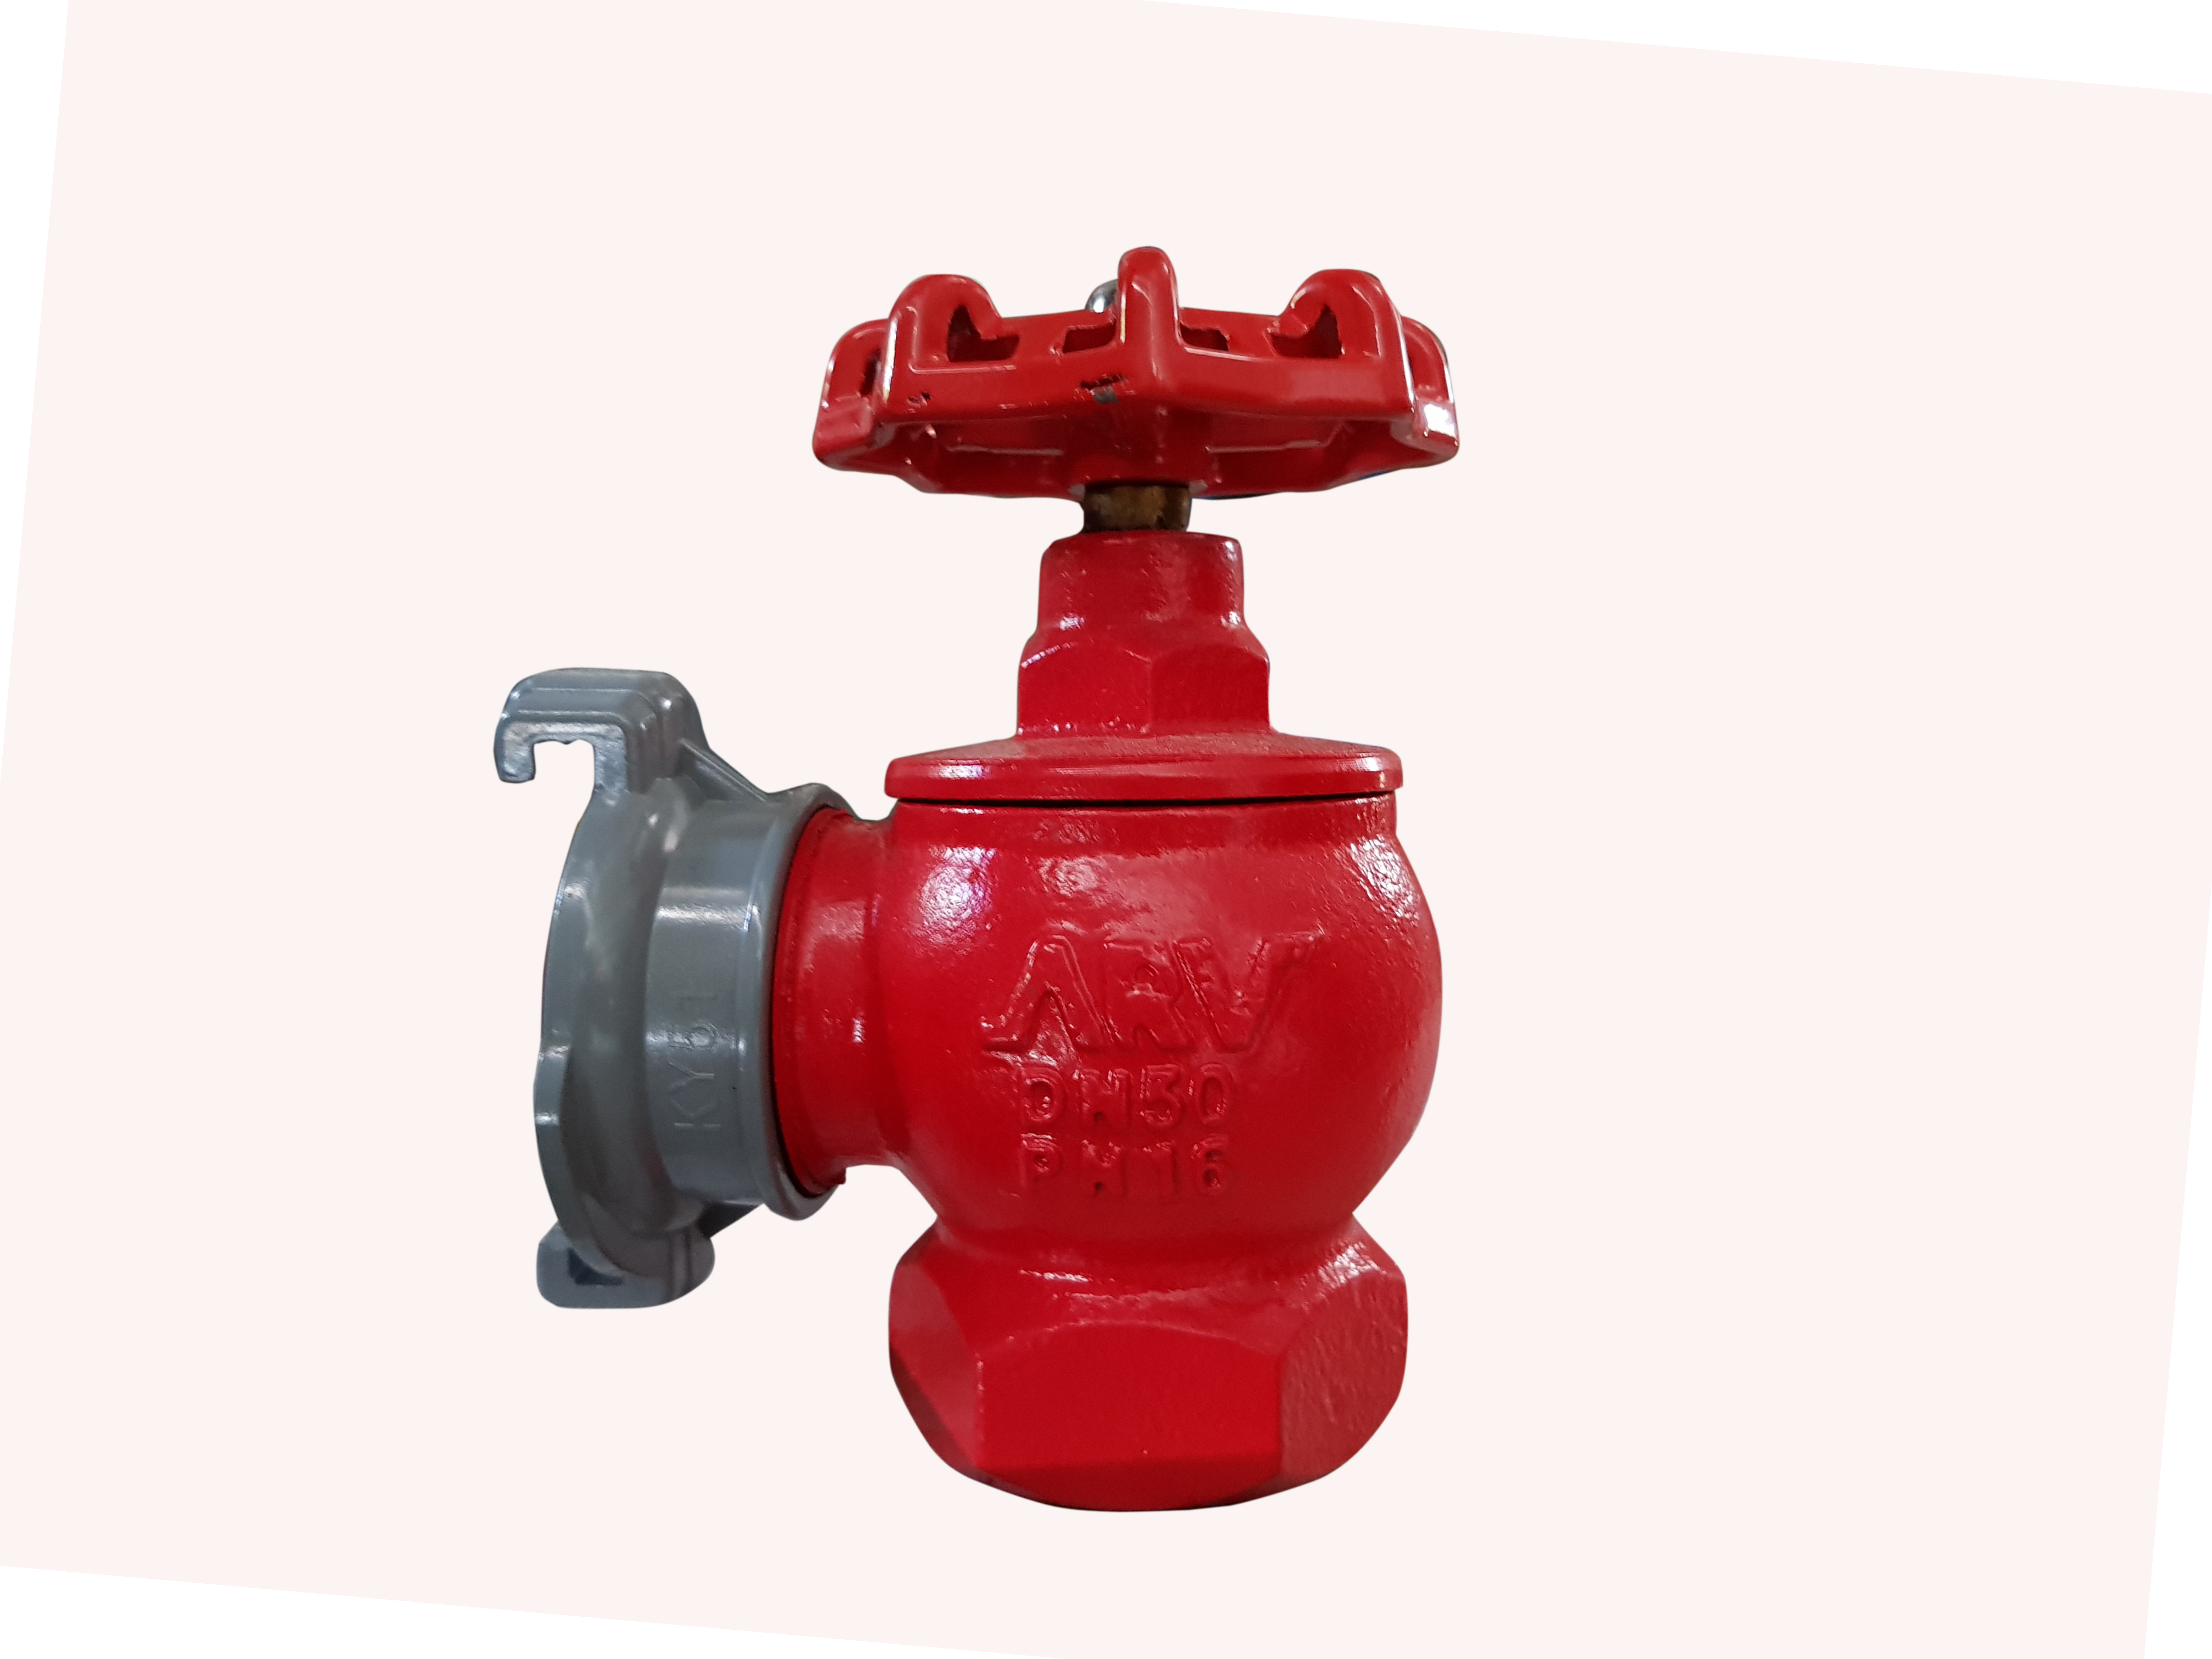 INDOOR FIRE HYDRANT